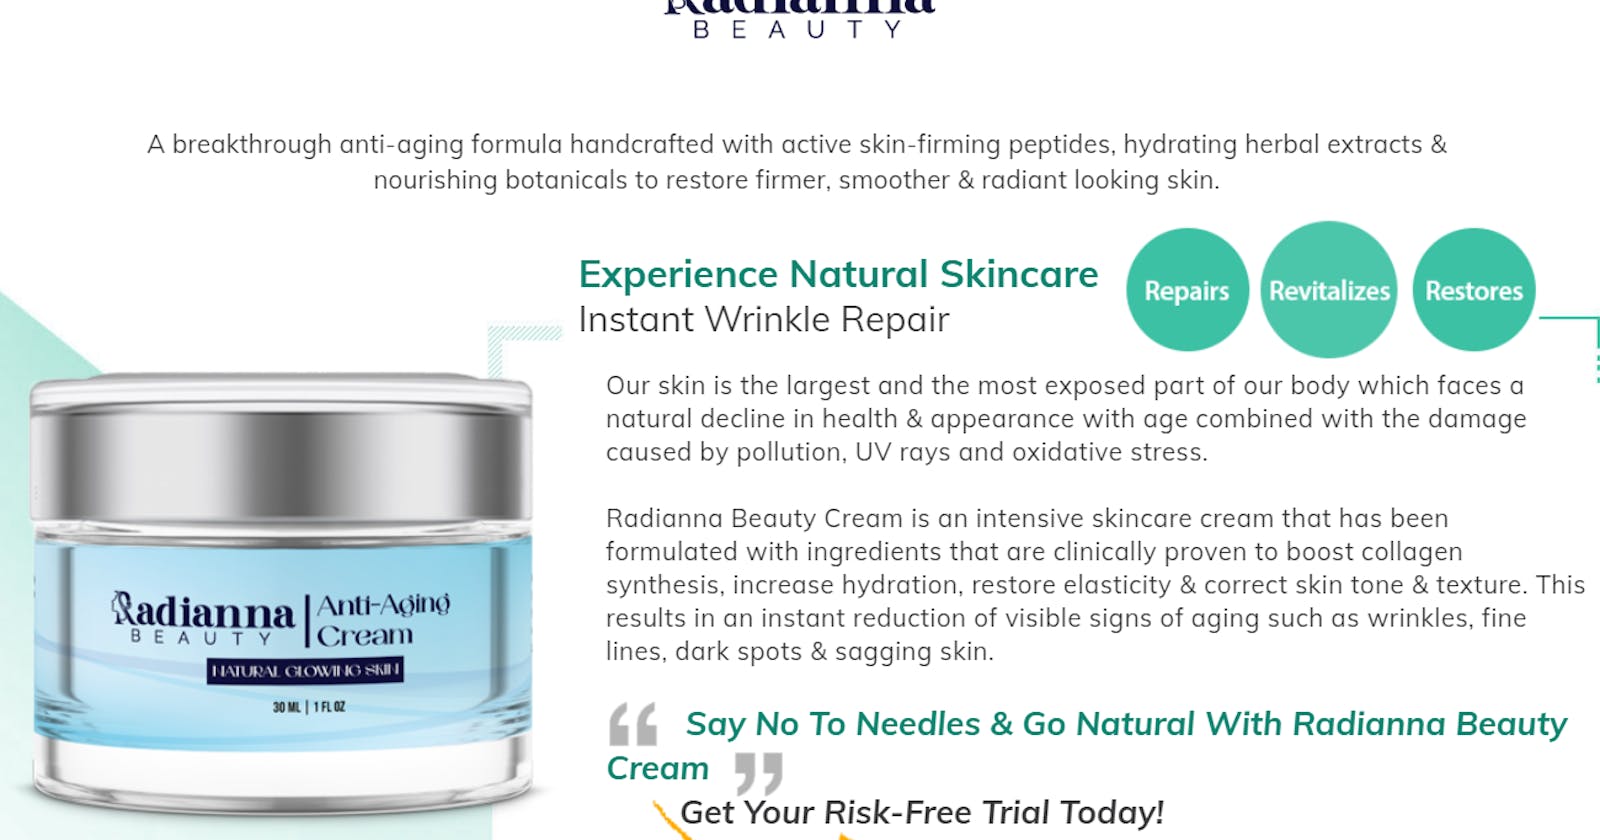 Radianna Beauty Anti Aging Cream: The Secret to Youthful and Radiant Skin!